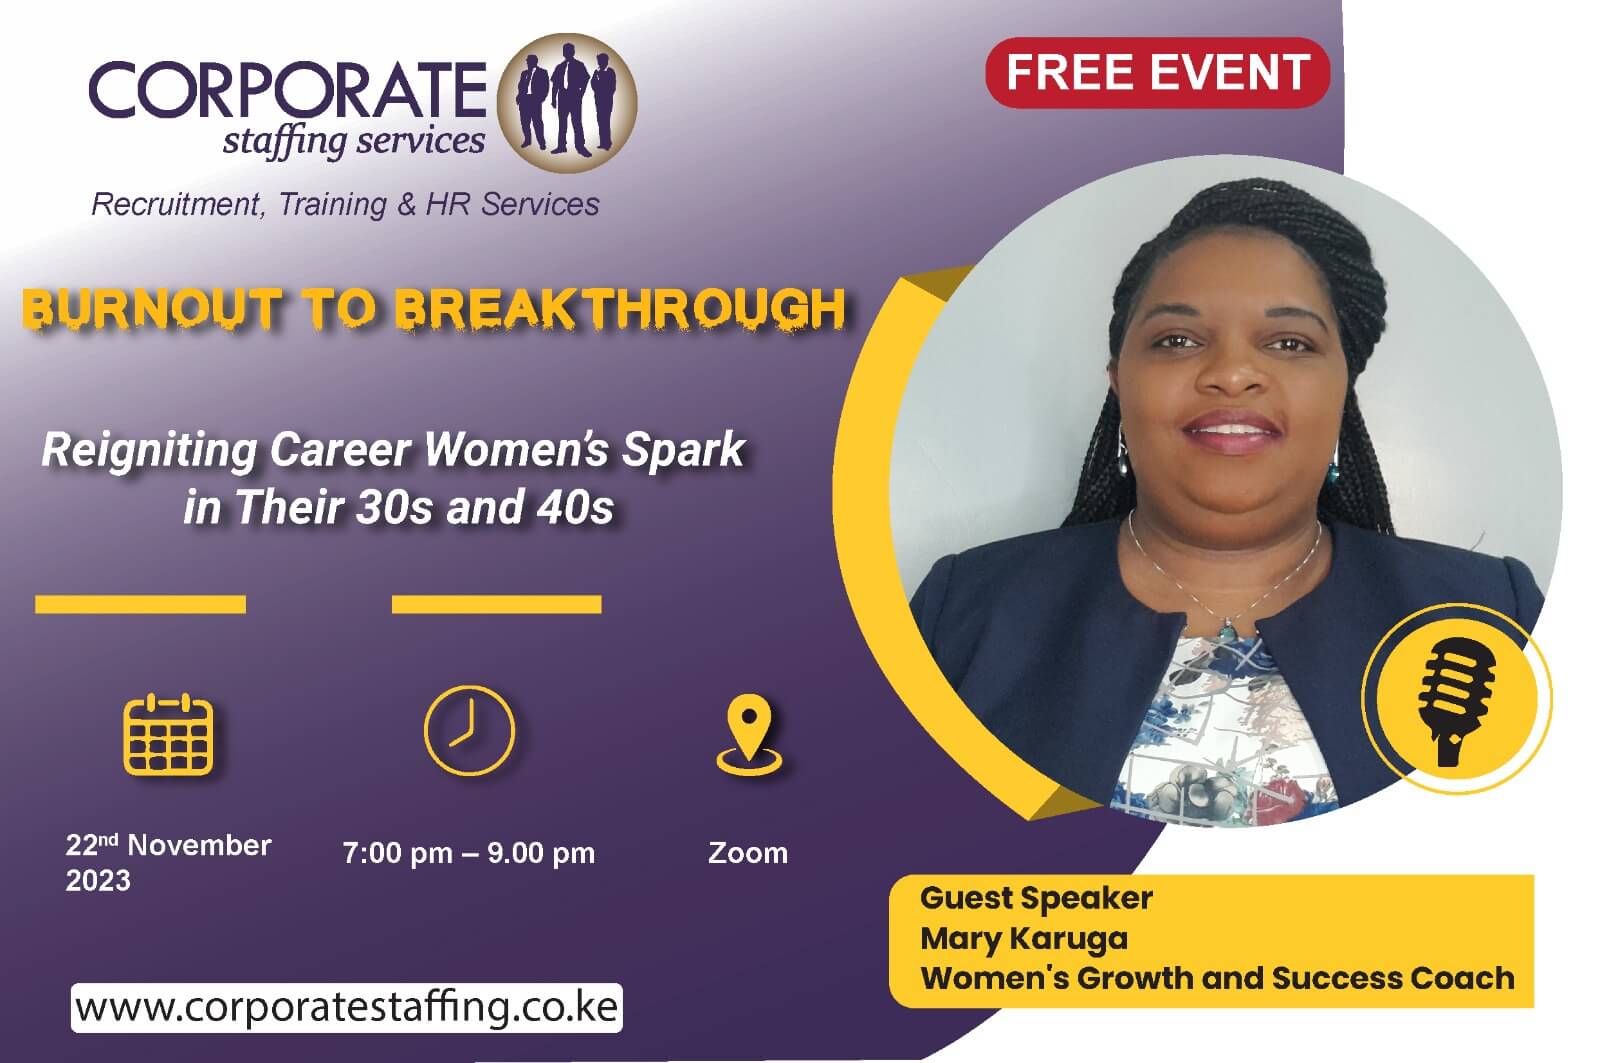 BURNOUT TO BREAKTHROUGH: Reigniting Career Women’s Spark in Their 30s and 40s (Free Event)